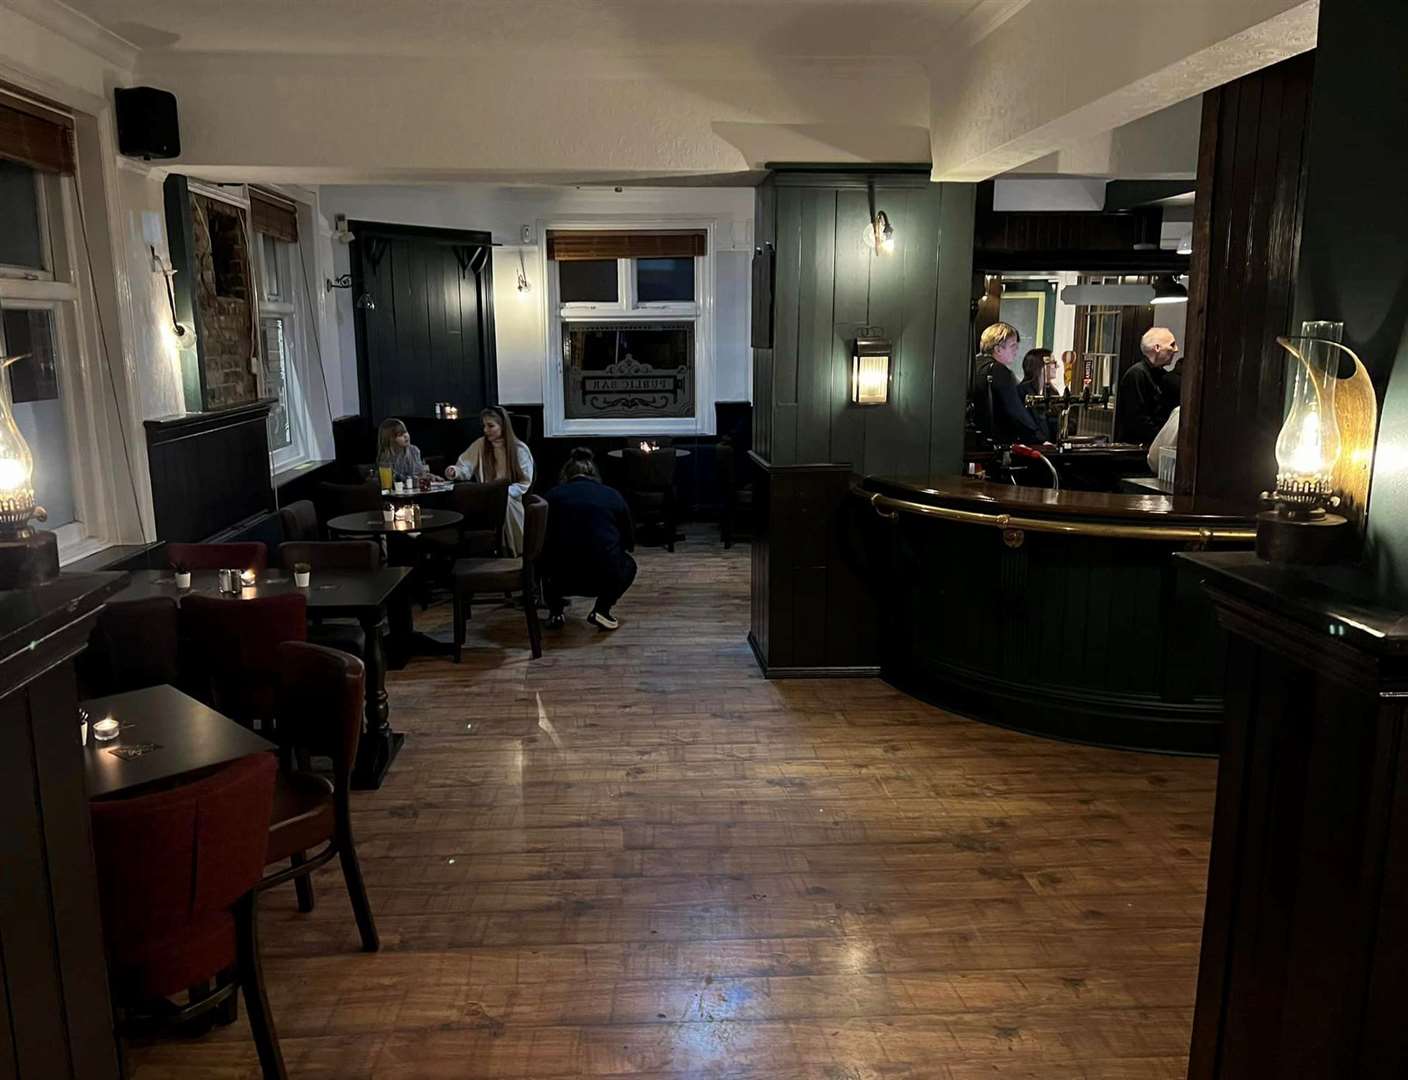 The redecorated interior of The Bull Inn